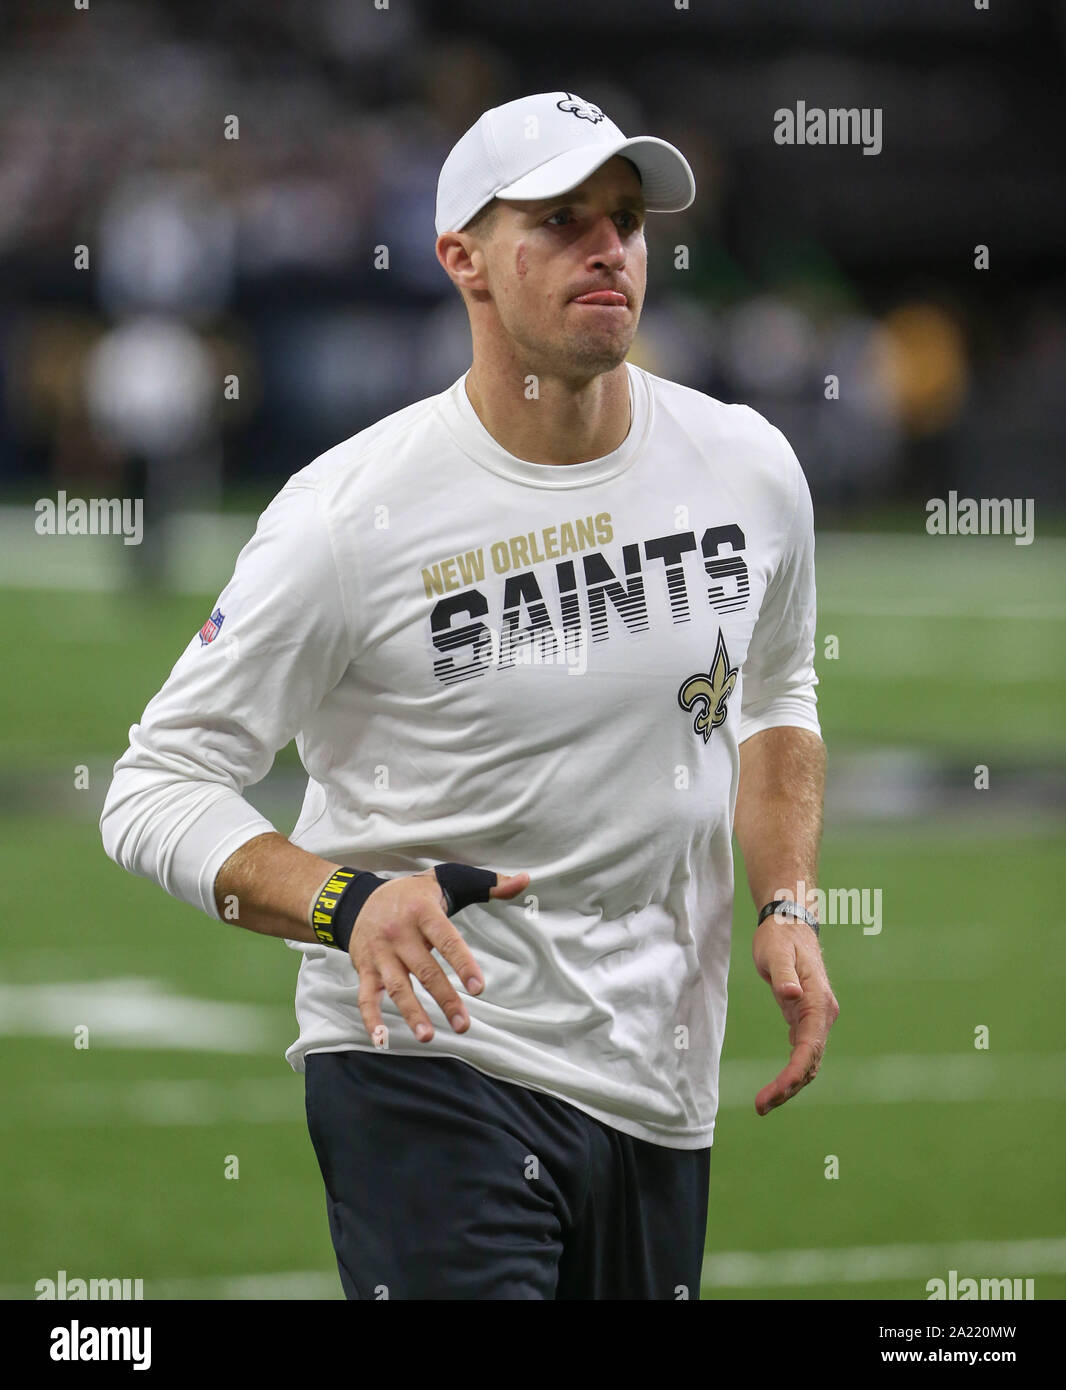 New Orleans, LA, USA. 29th Sep, 2019. New Orleans Saints injured quarterback Drew Brees jogs off the field before the game between the New Orleans Saints and the Dallas Cowboys at the Mercedes Benz Superdome in New Orleans, LA. Jonathan Mailhes/CSM/Alamy Live News Stock Photo